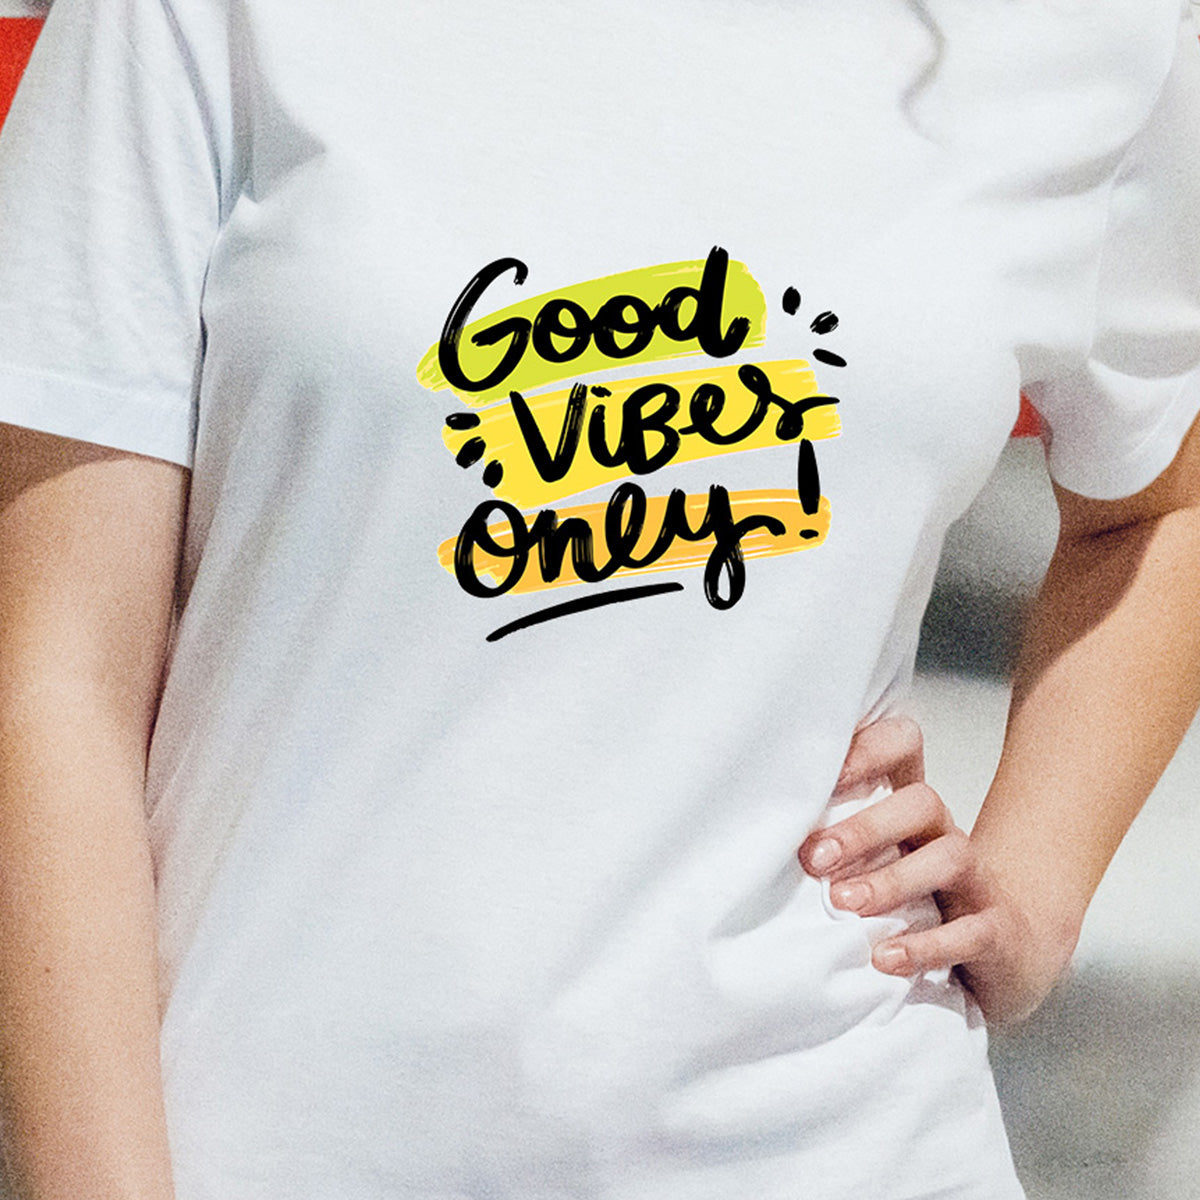 Good Vibes Only - Printed Cotton T- Shirt - White